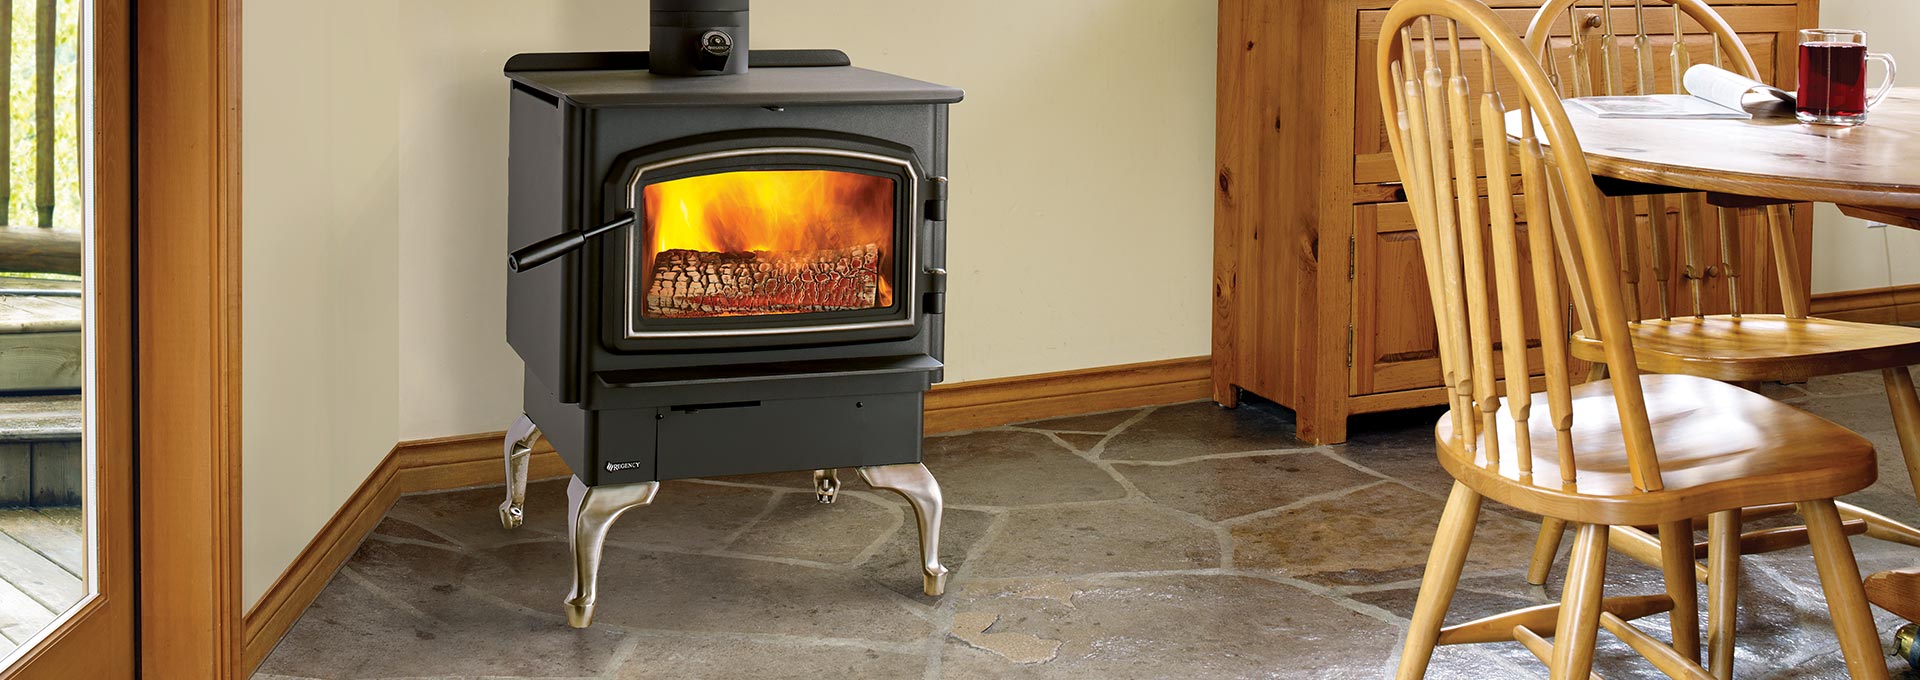 Free Standing Gas Log Fireplace Awesome Wood Stoves